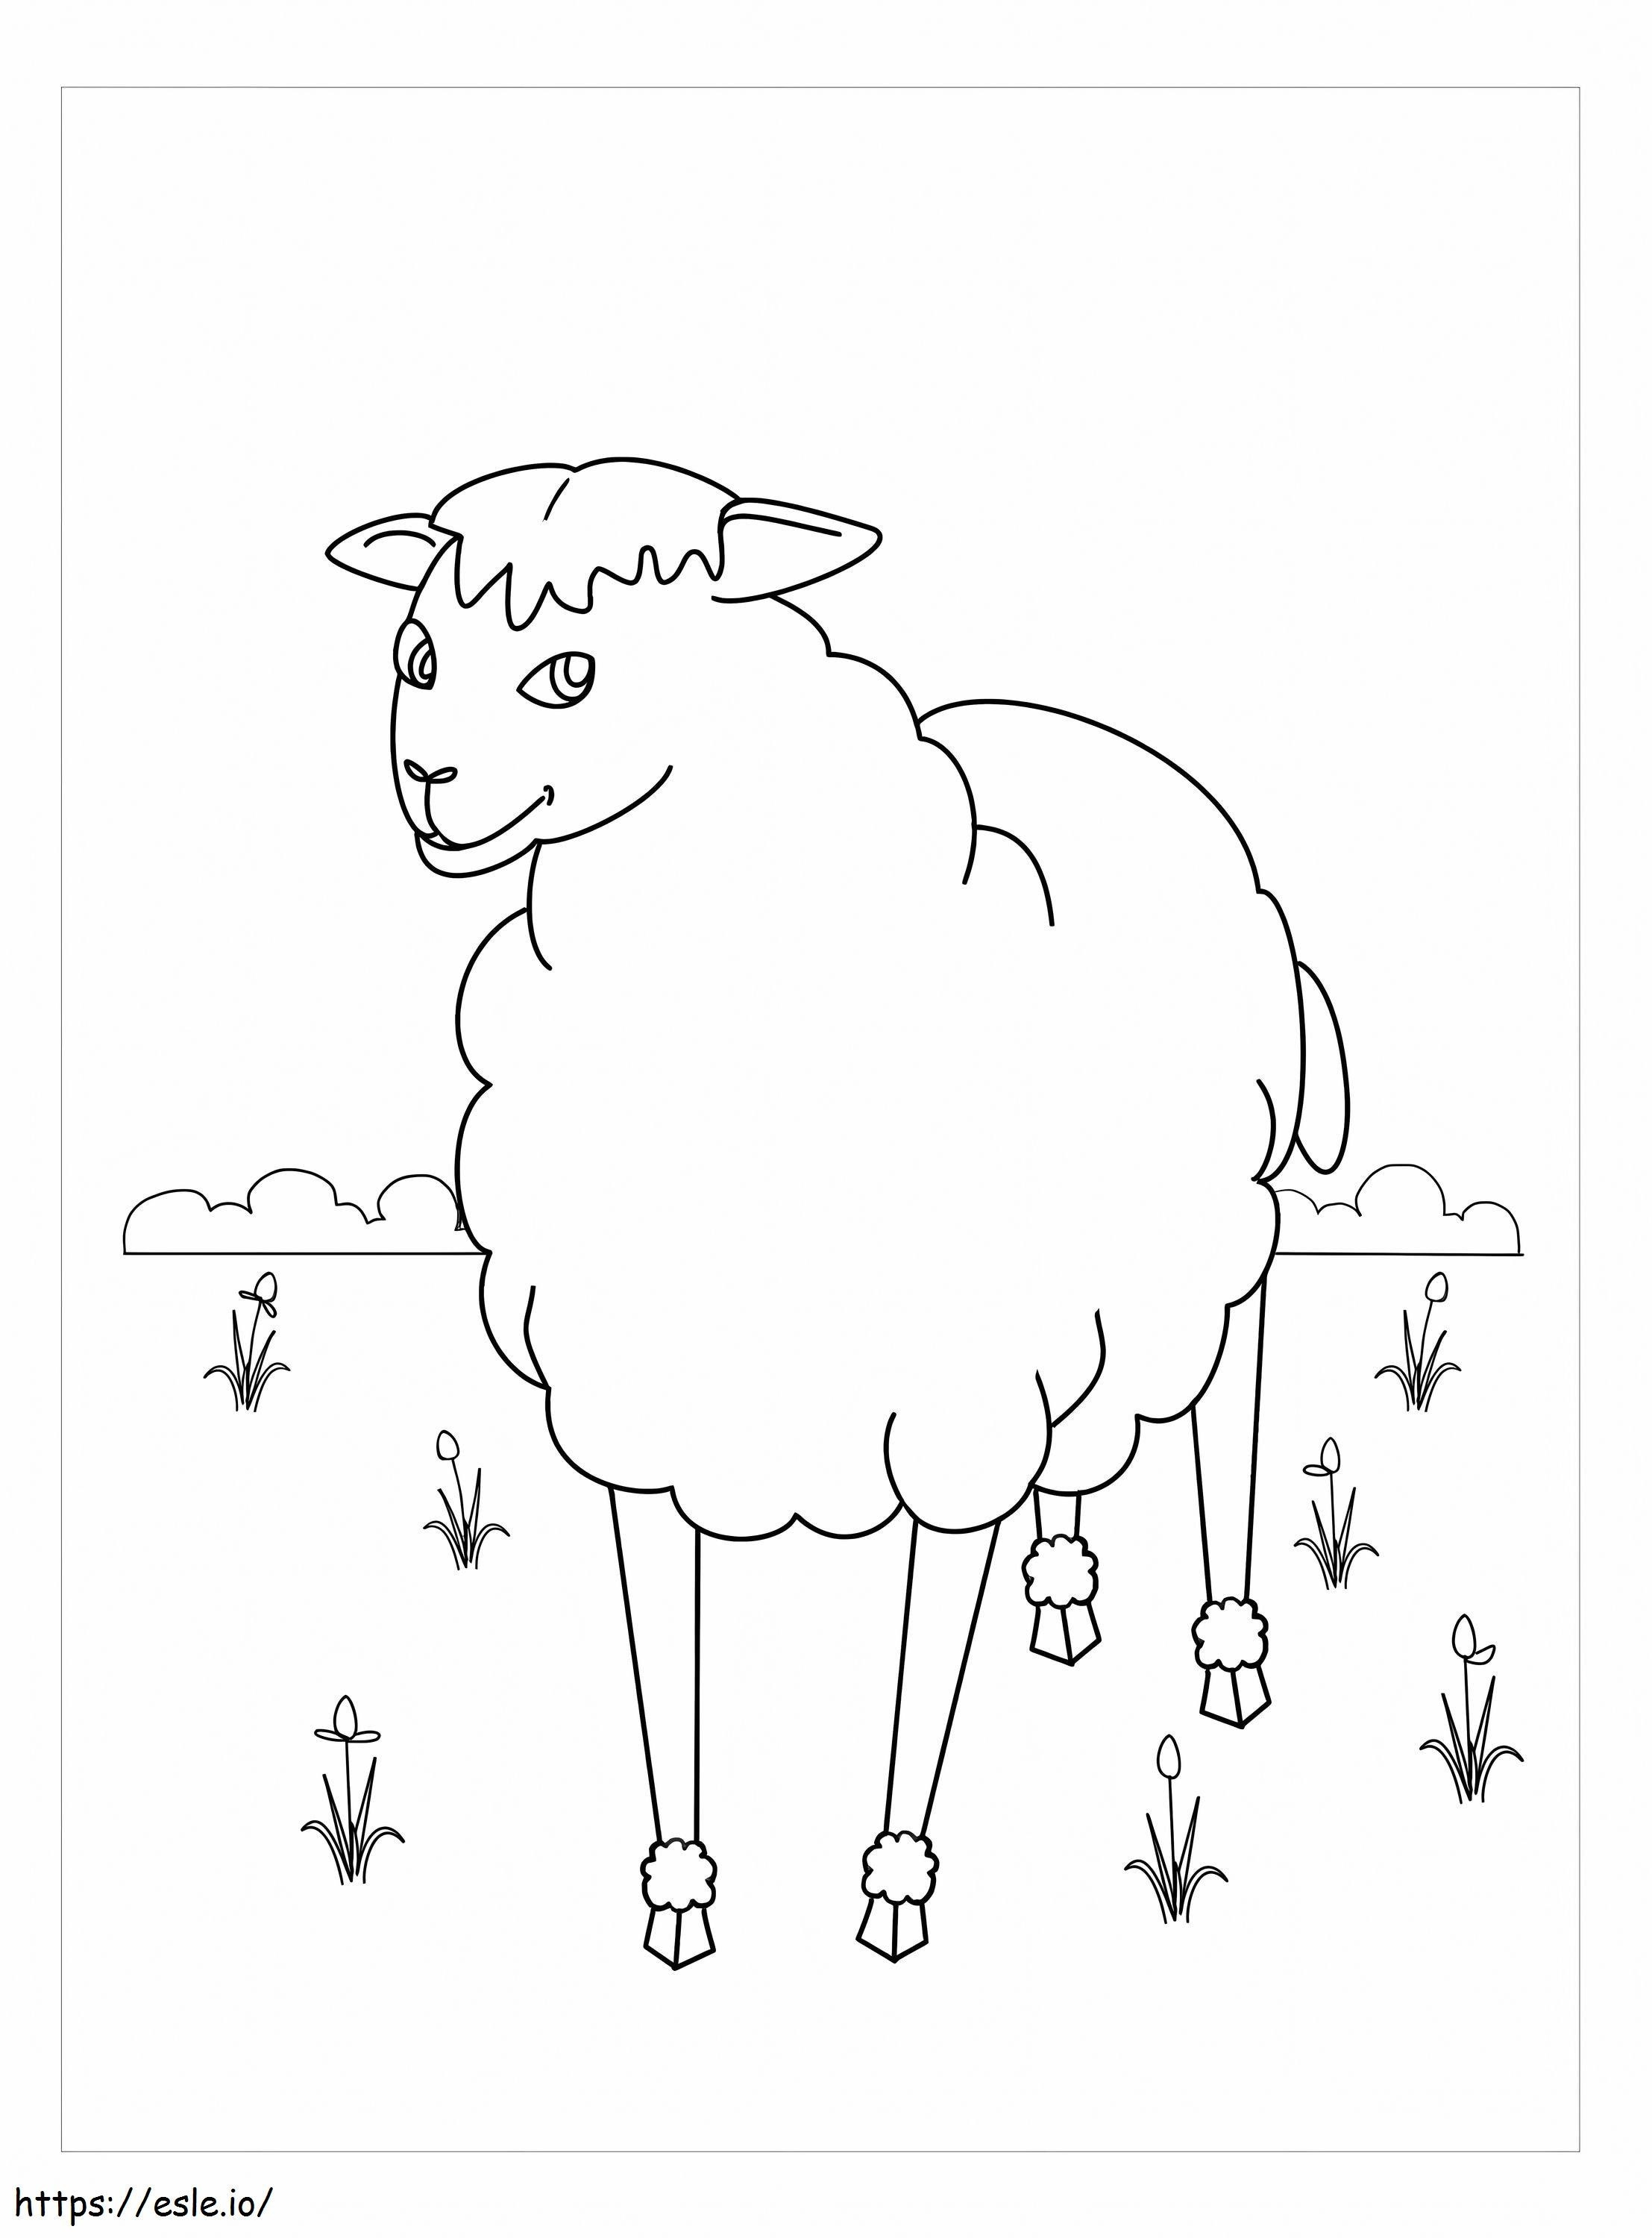 Awesome Sheep coloring page